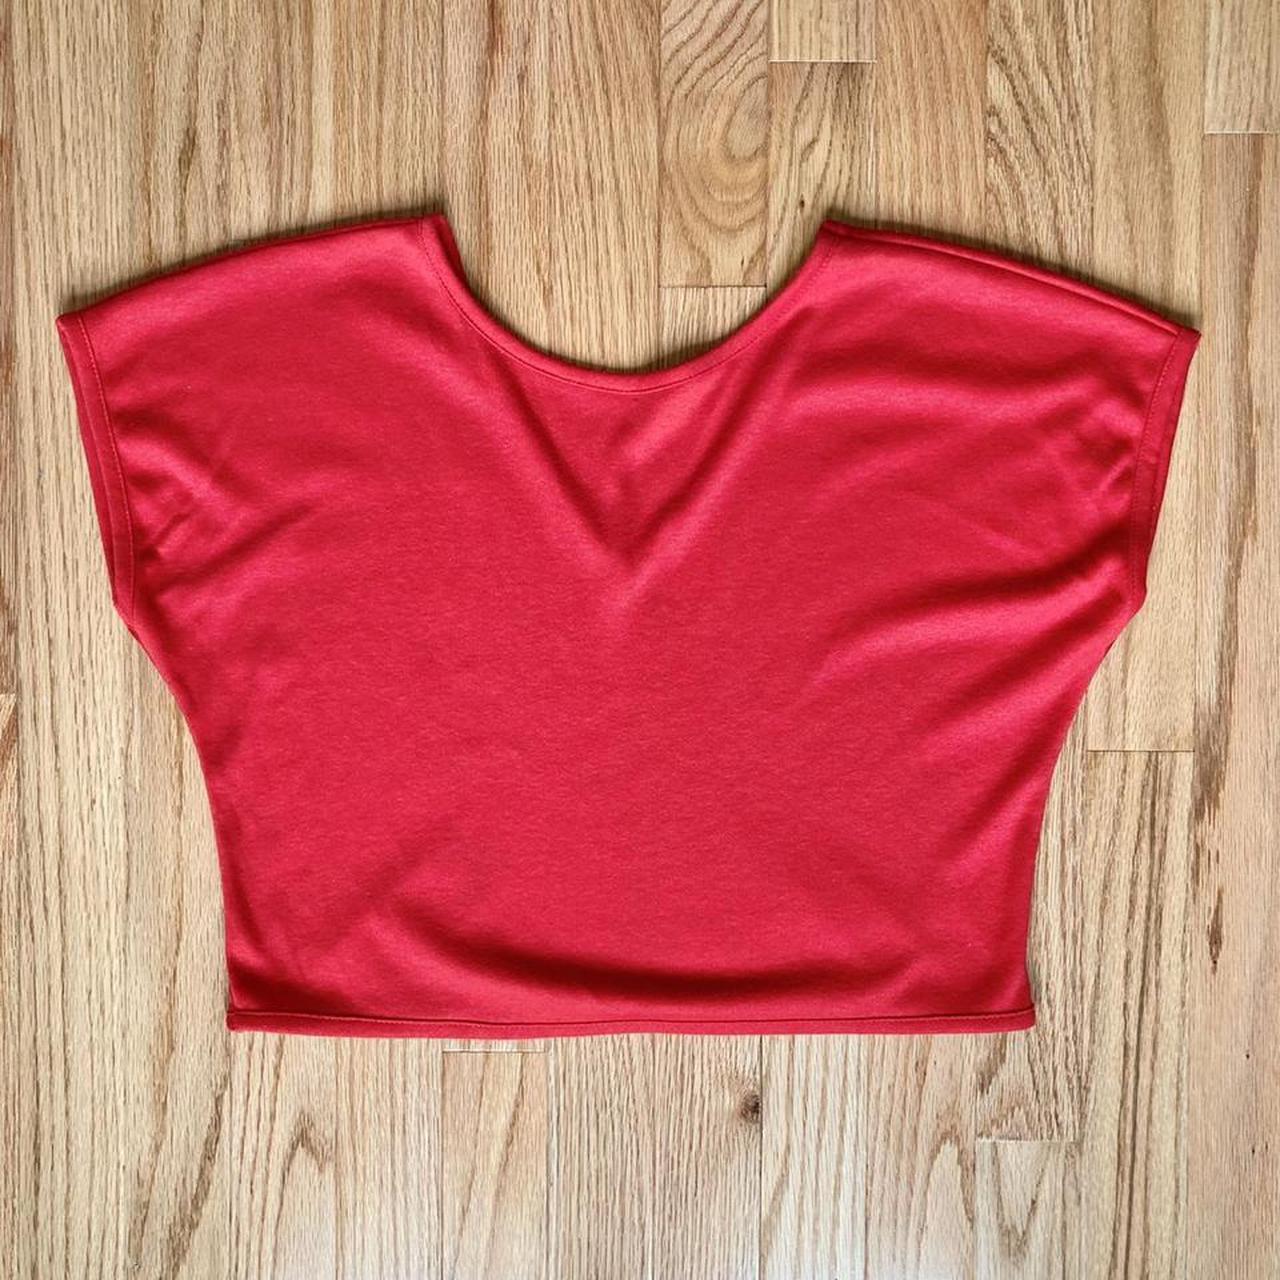 Cute, simple red crop top. One side is rounded - I - Depop